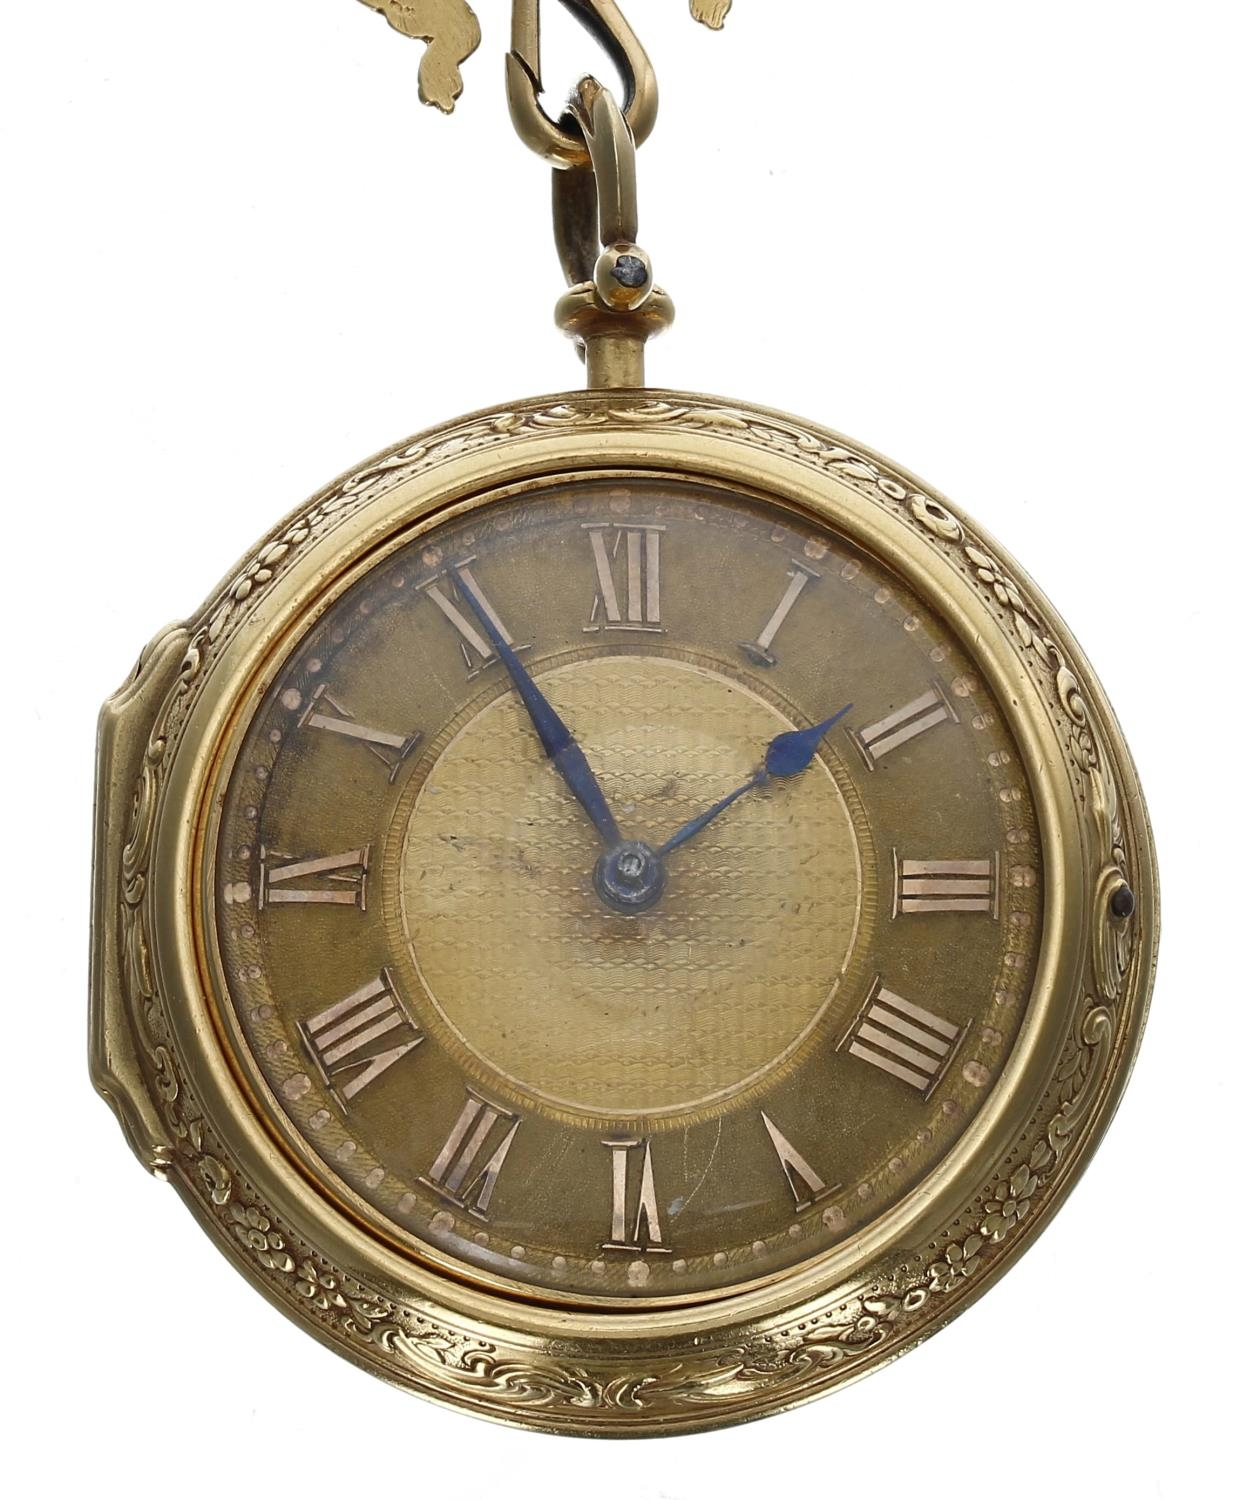 Thomas Eastland, London - Fine English mid-18th century gold verge repoussé pair cased pocket watch, - Image 3 of 9